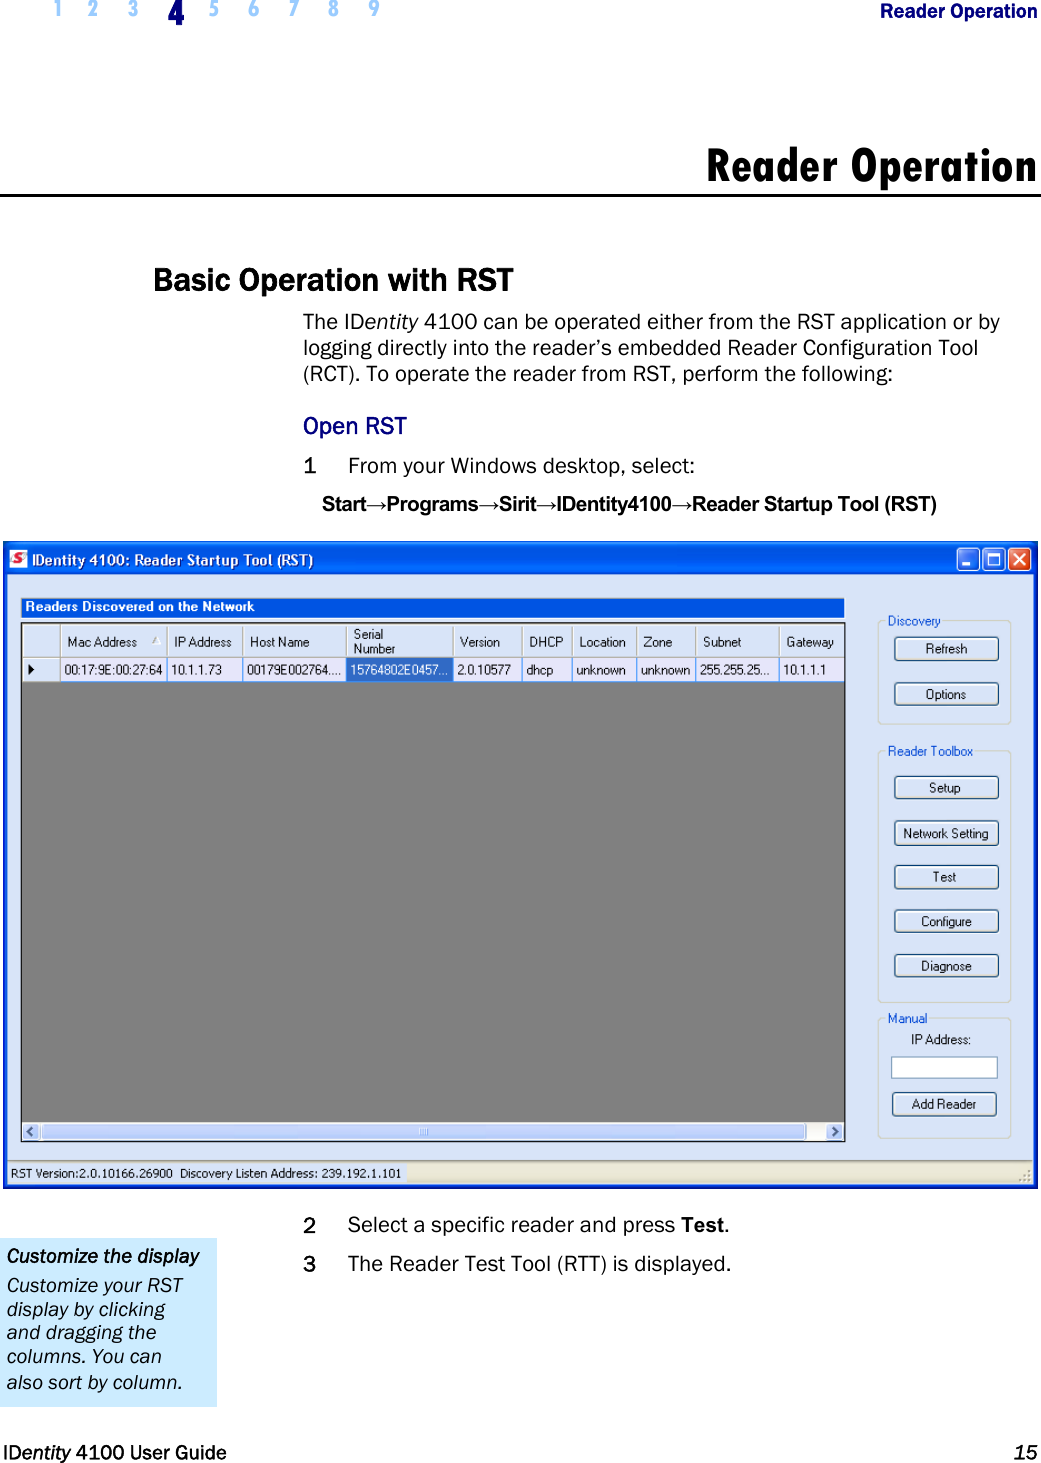  1 2  3 4 5 6 7 8 9            Reader Operation   IDentity 4100 User Guide  15  Reader Operation  Basic Operation with RST The IDentity 4100 can be operated either from the RST application or by logging directly into the reader’s embedded Reader Configuration Tool (RCT). To operate the reader from RST, perform the following: Open RST 1 From your Windows desktop, select: Start→Programs→Sirit→IDentity4100→Reader Startup Tool (RST)  2 Select a specific reader and press Test.  3 The Reader Test Tool (RTT) is displayed. Customize the display Customize your RST display by clicking and dragging the columns. You can also sort by column. 